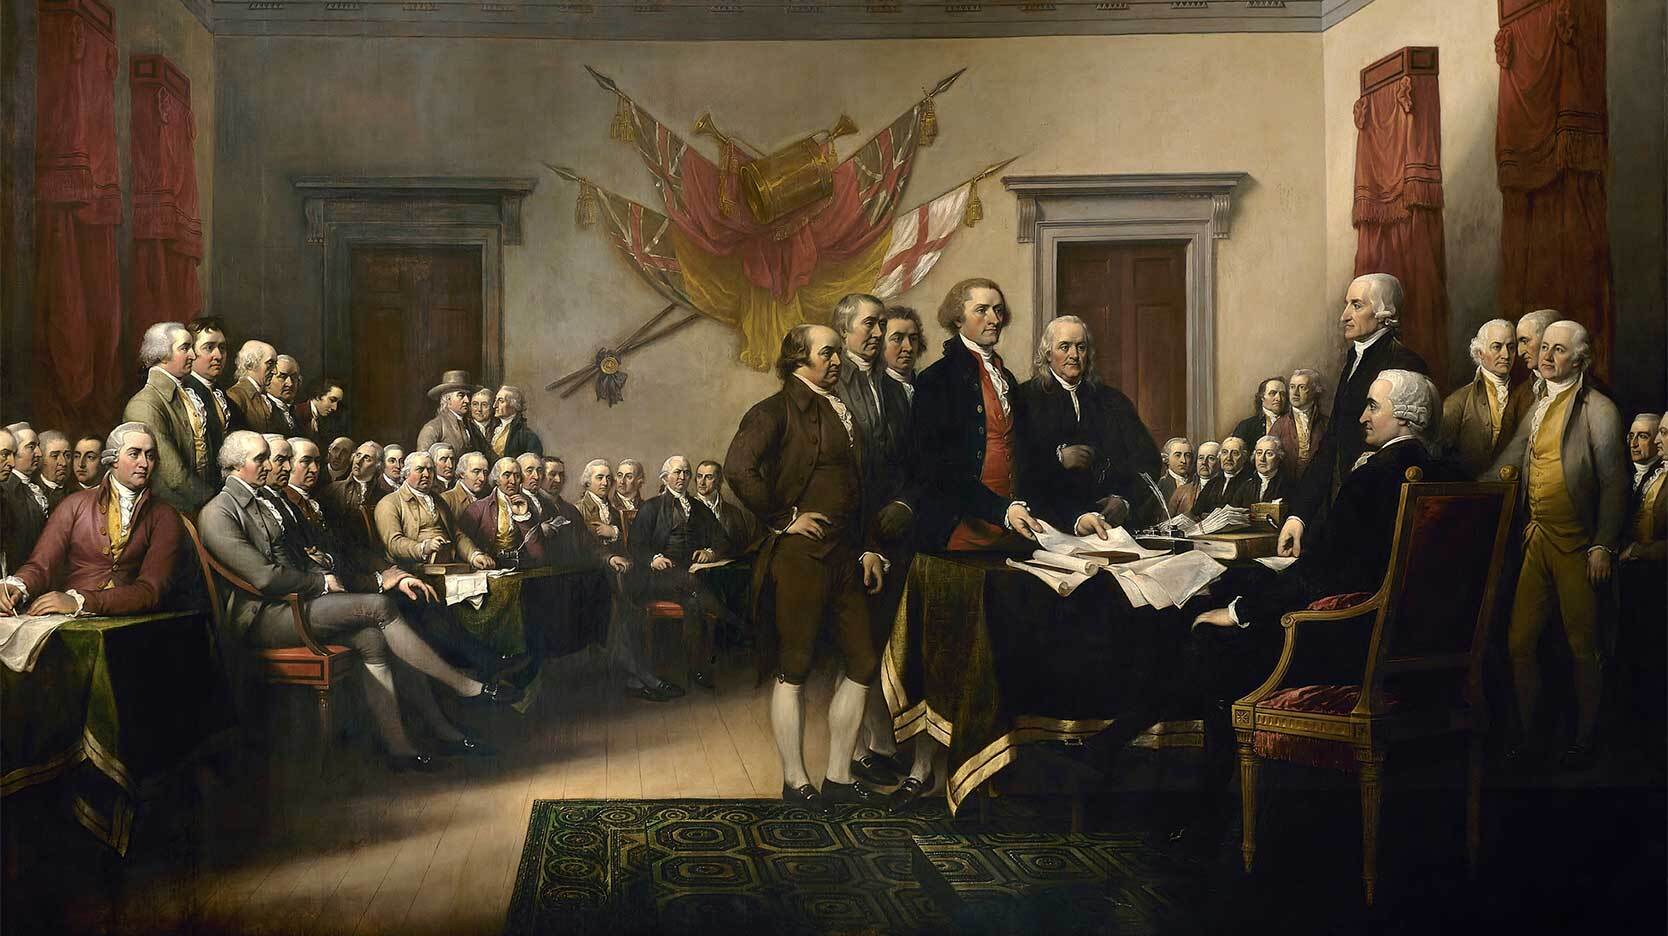 leaders presenting the Declaration of Independence